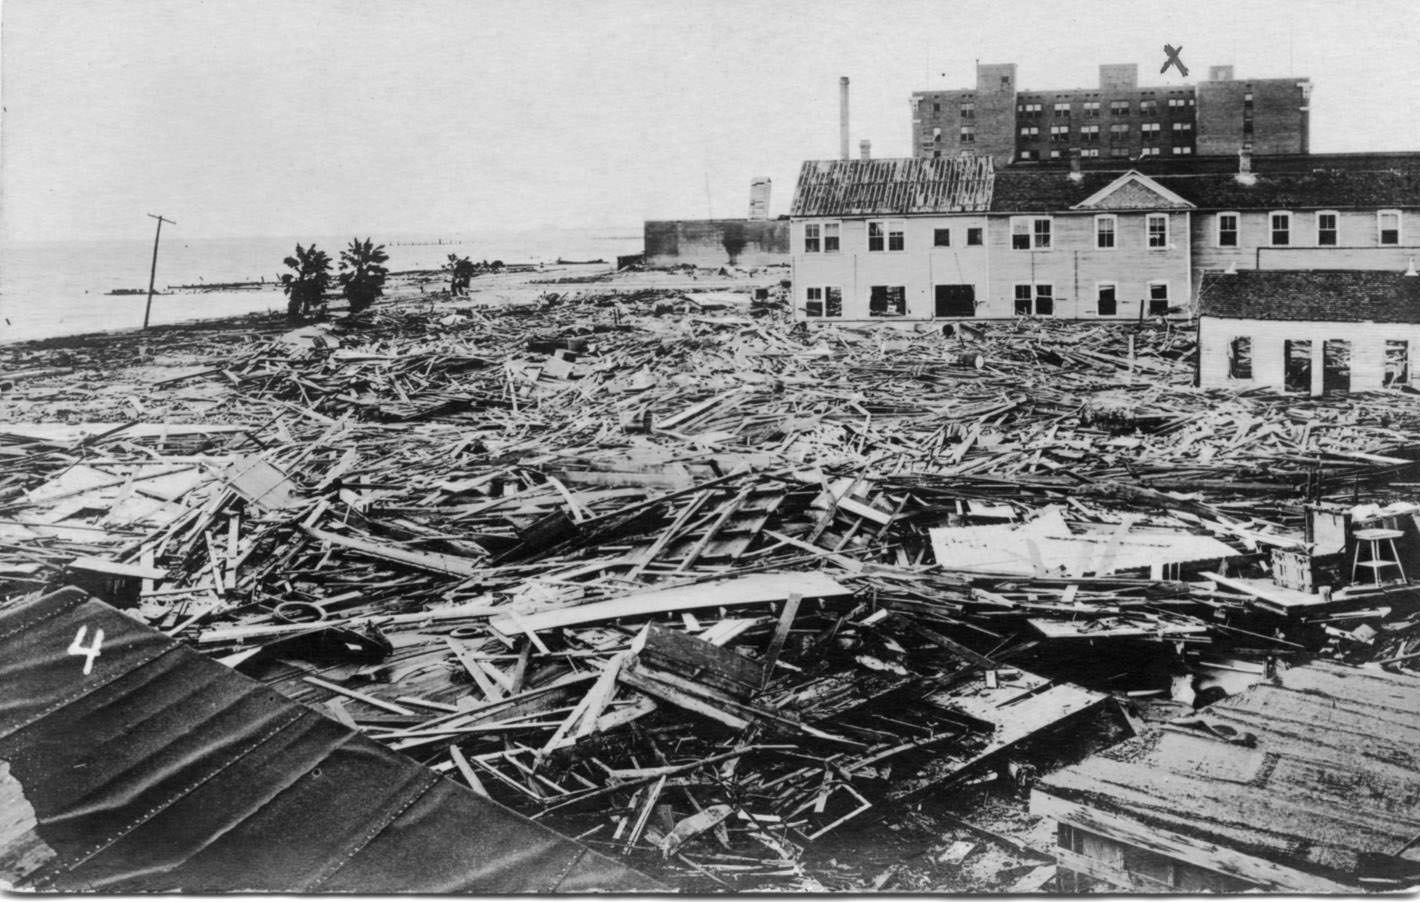 Buildings along the shoreline surrounded by debris after the Corpus Christi hurricane of 1919.